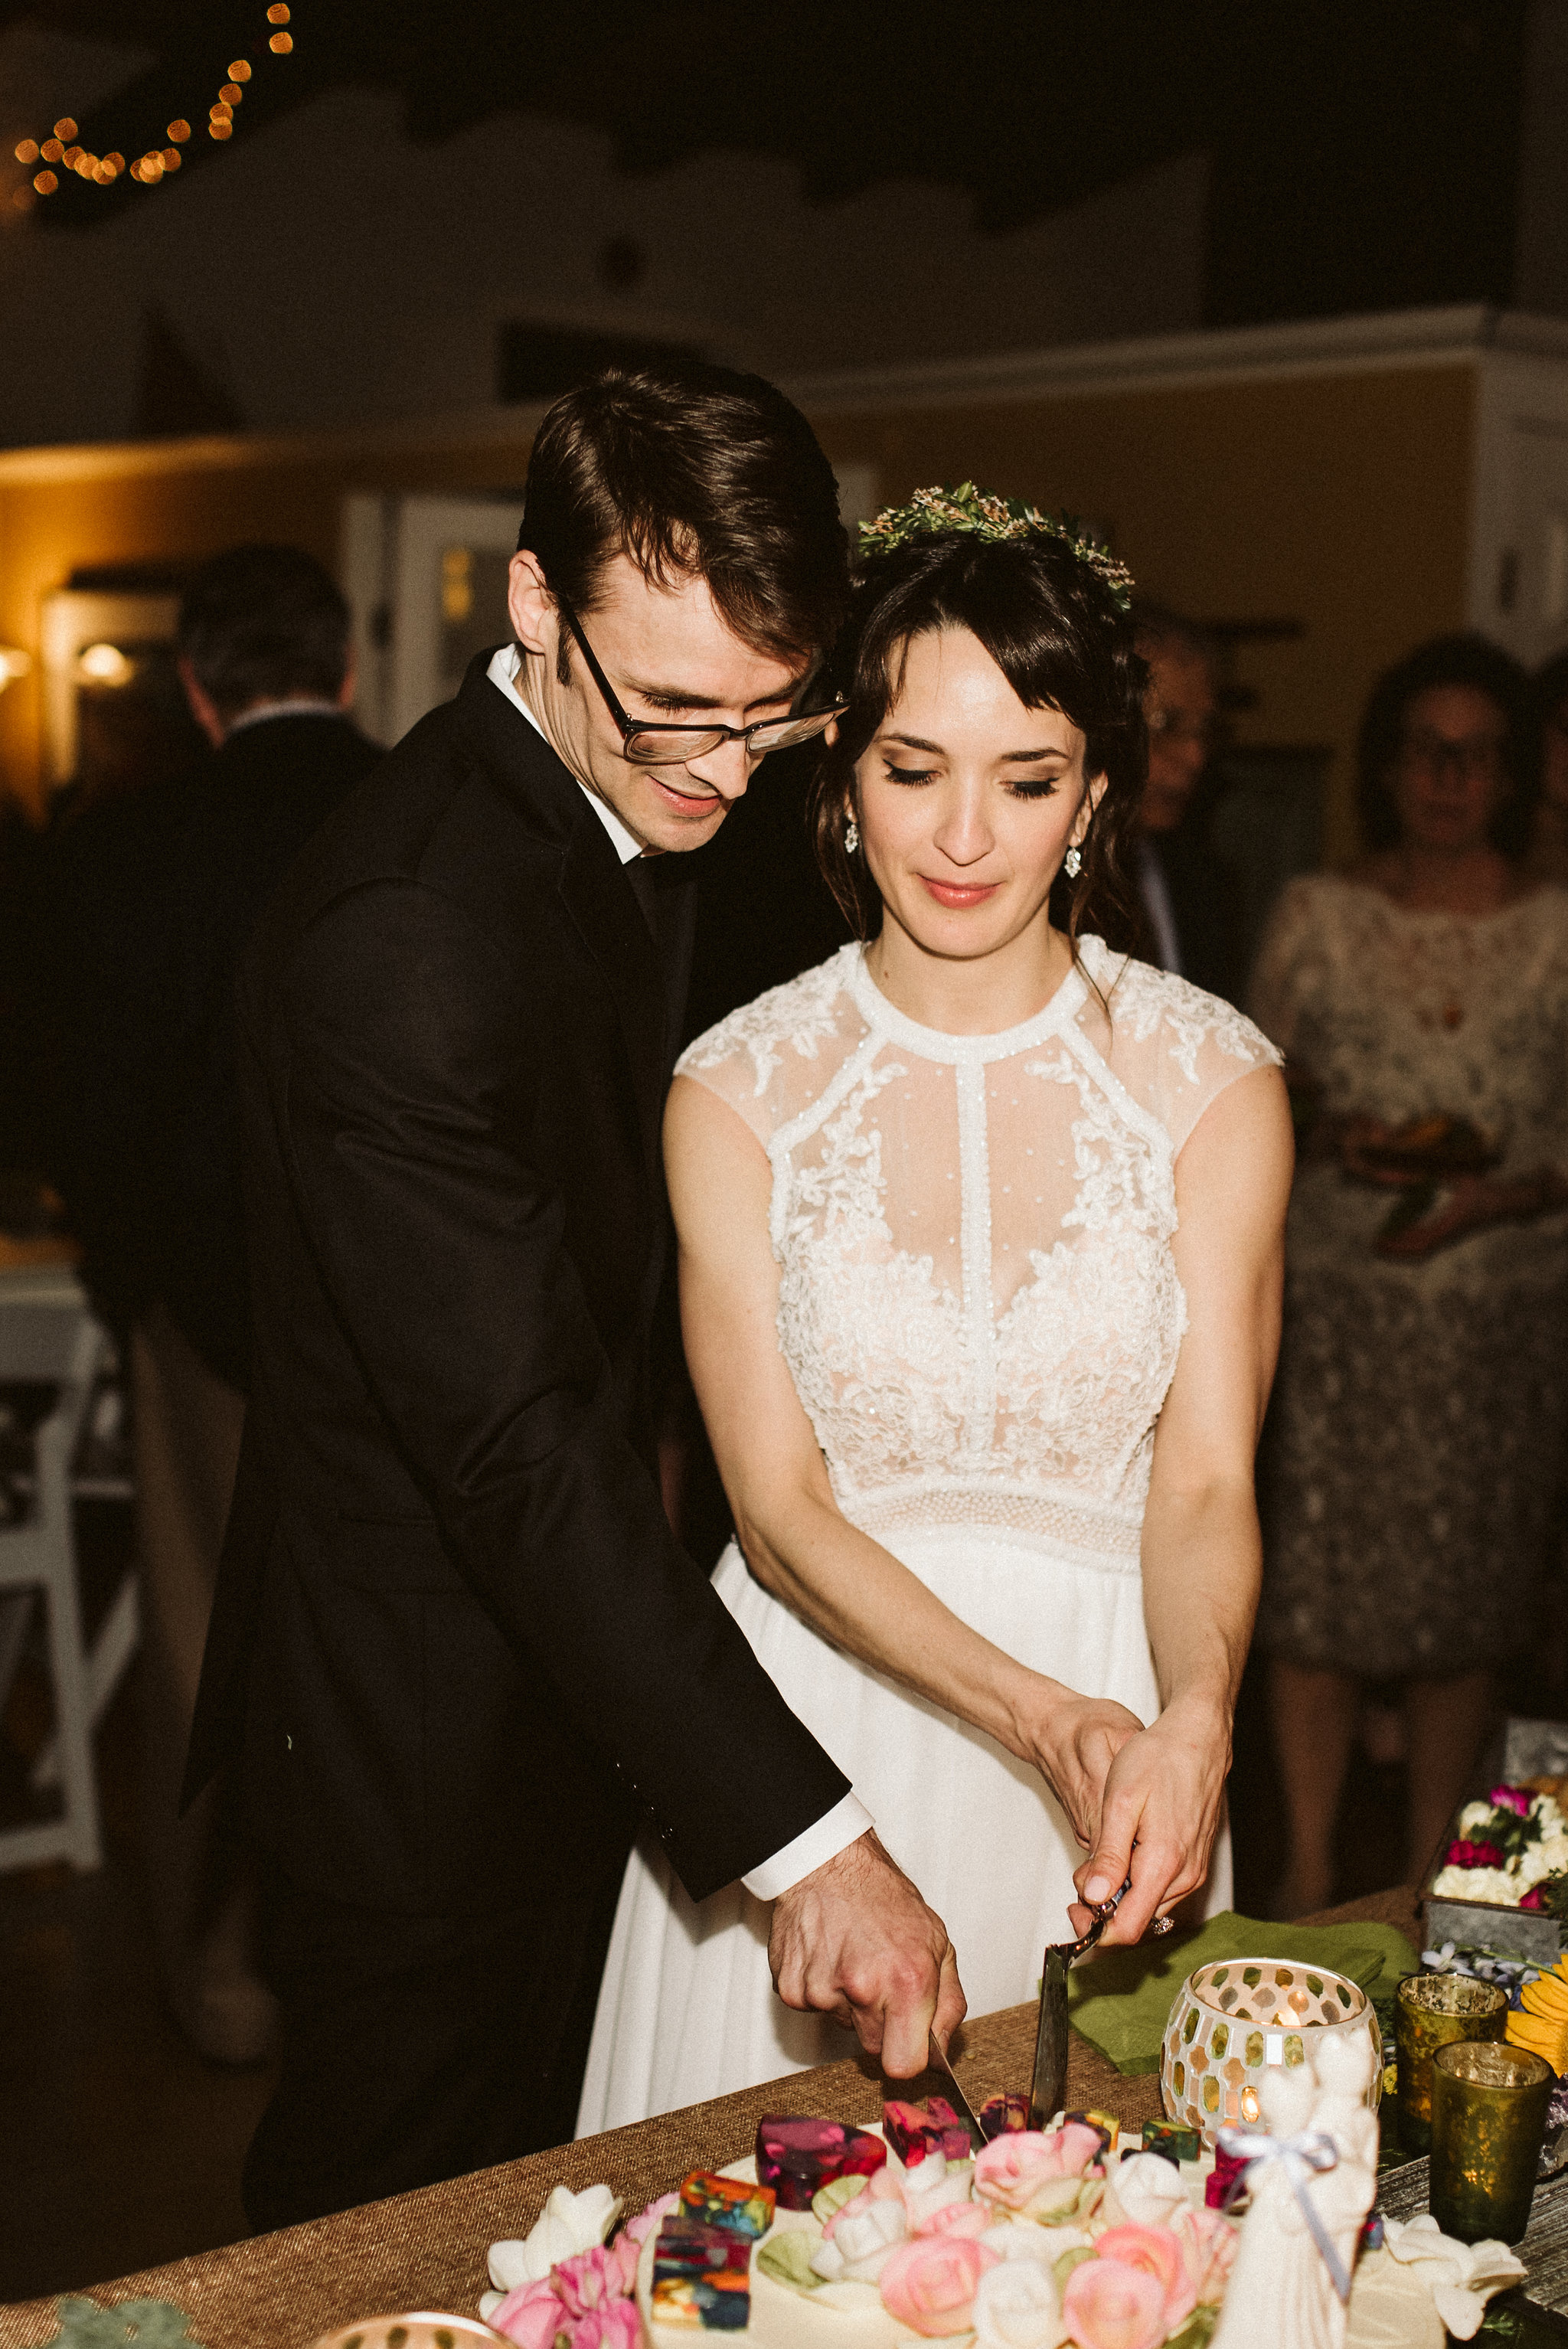  Baltimore, Maryland Wedding Photographer, Hampden, Eco-Friendly, Green, The Elm, Simple and Classic, Vintage, Bride and Groom Cutting the Cake at Reception, Patisserie Poupon Cake 